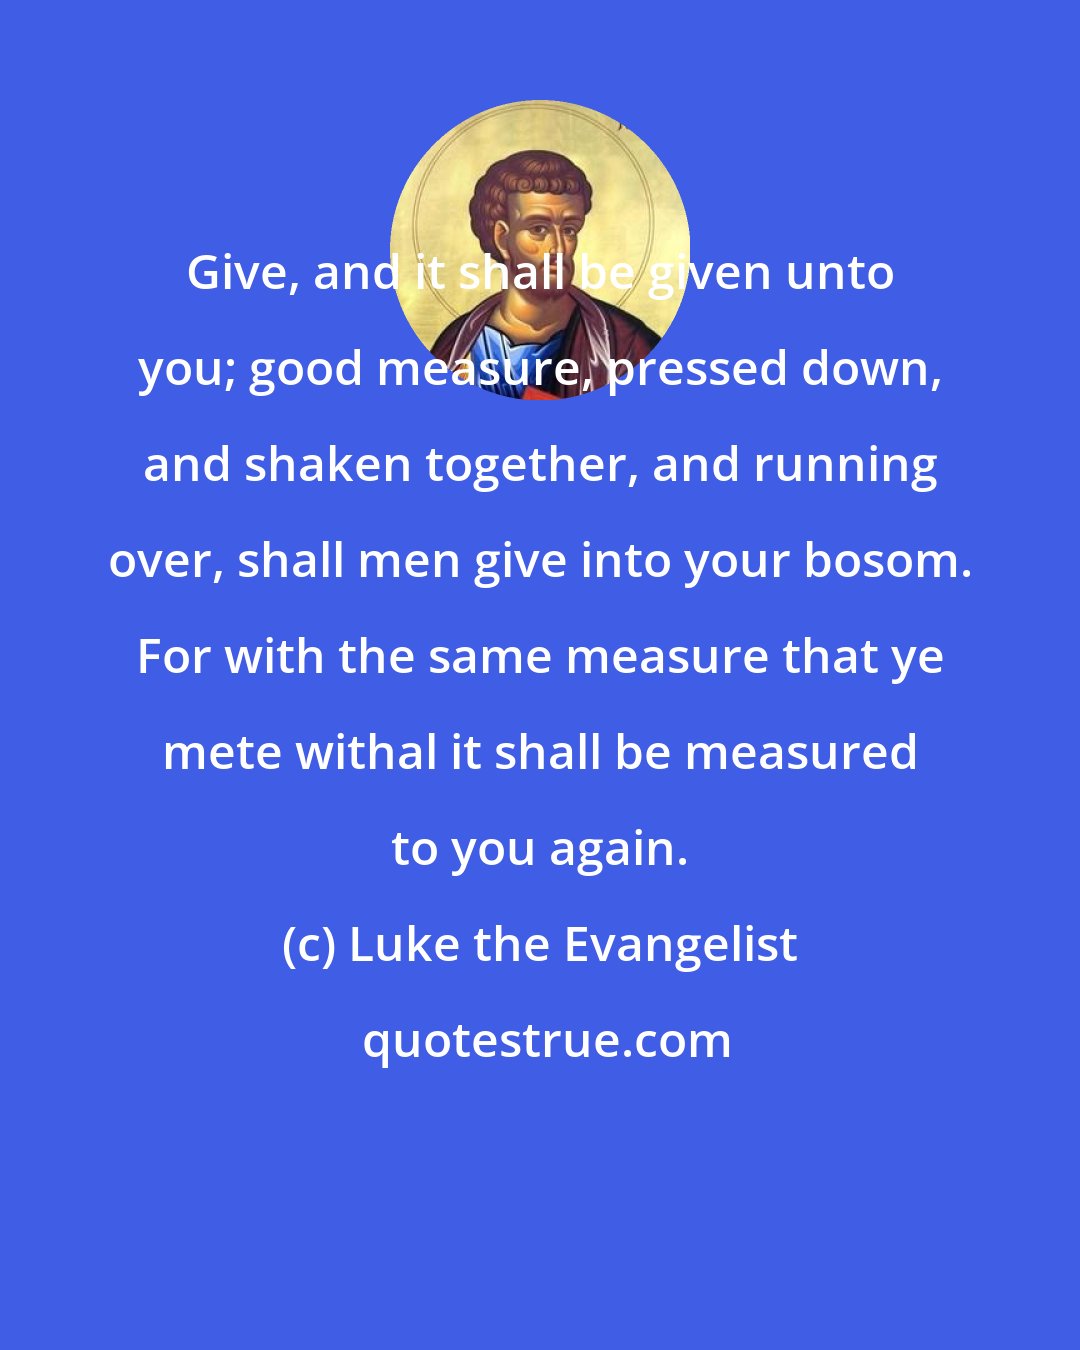 Luke the Evangelist: Give, and it shall be given unto you; good measure, pressed down, and shaken together, and running over, shall men give into your bosom. For with the same measure that ye mete withal it shall be measured to you again.